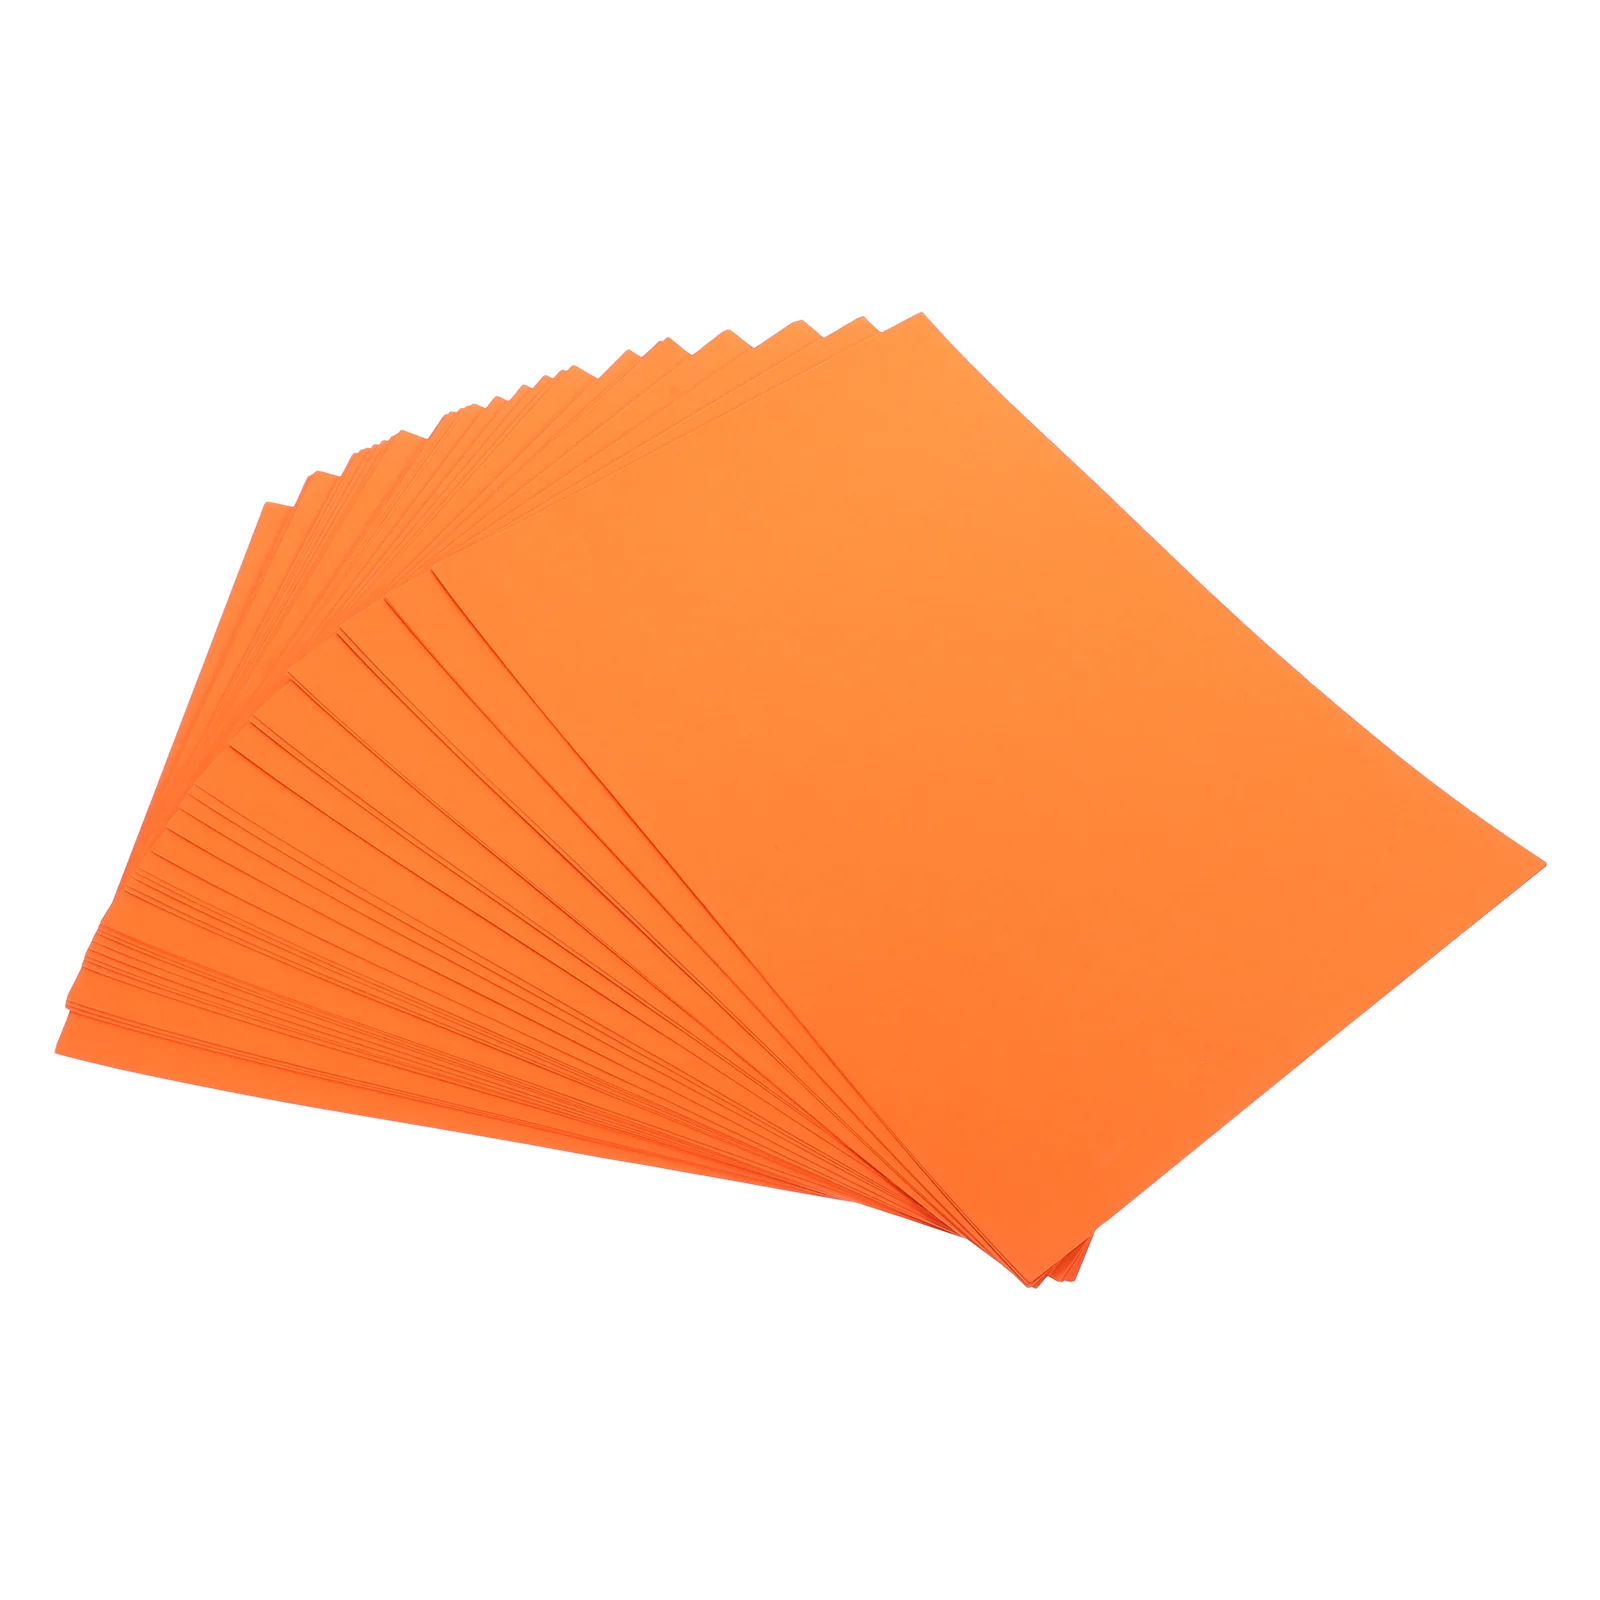 

50 Sheets A4 Color Cardboard Orange Cardstock Origami Papers Kids Crafts DIY Supplies Painting Tools Blank